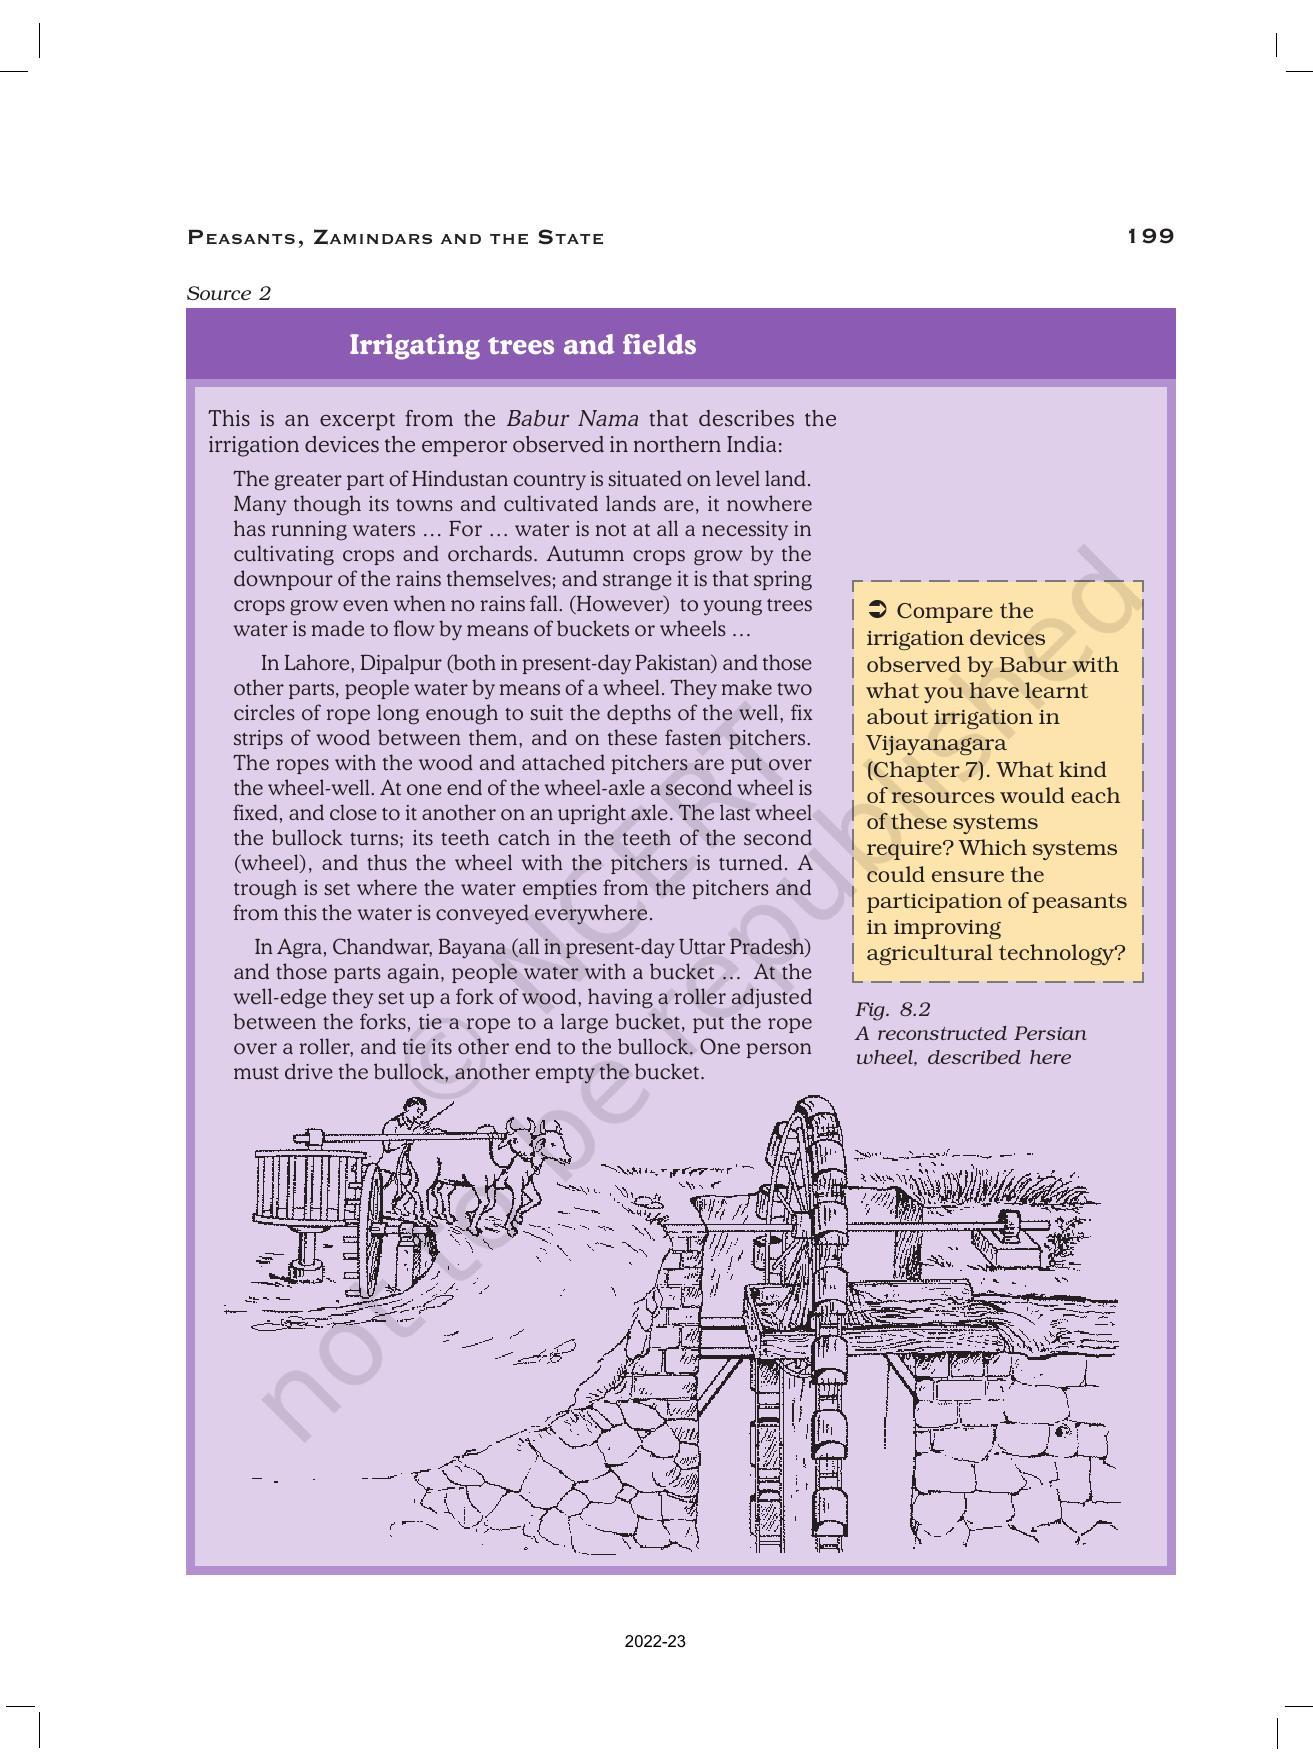 NCERT Book for Class 12 History (Part-II) Chapter 8 Peasants, Zamindars, and the State - Page 4